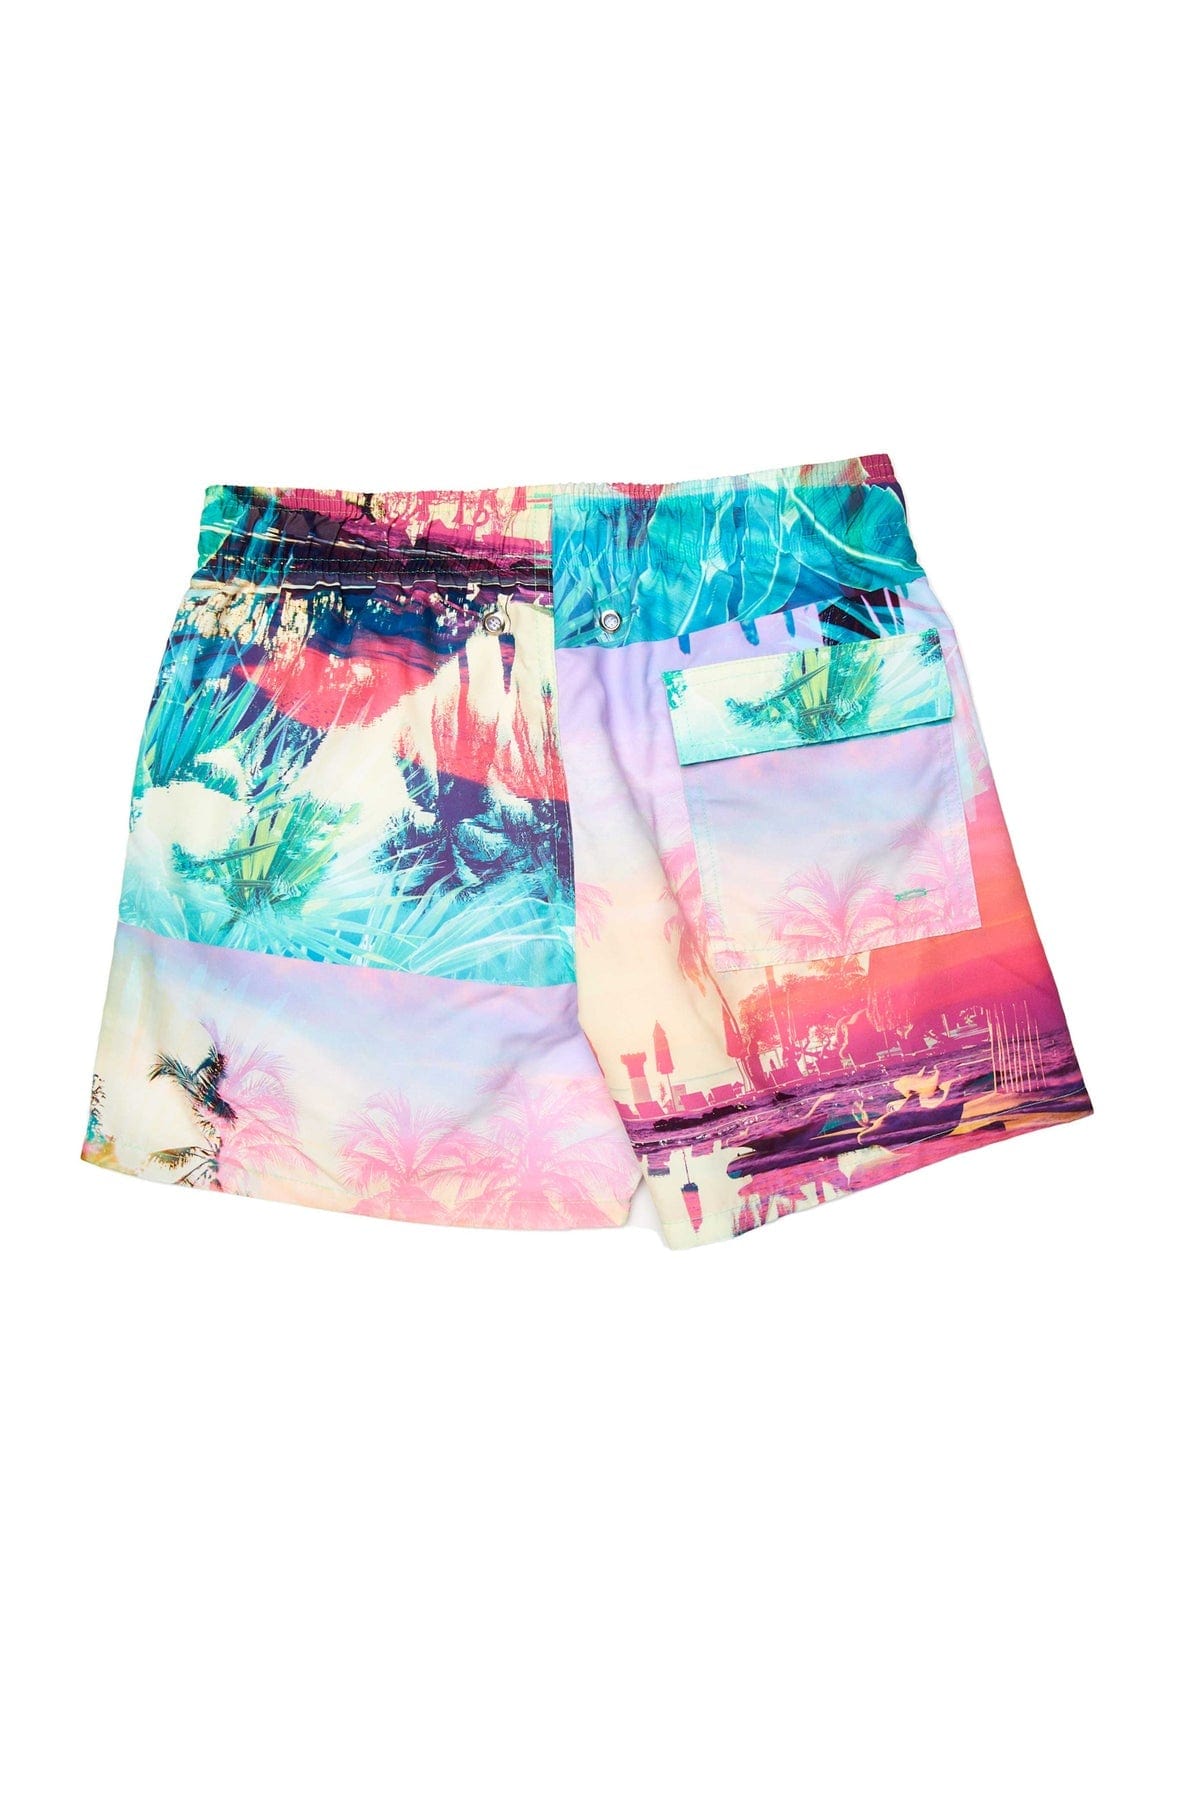 Le Club Apparel & Accessories > Clothing > Shorts Le Club Men's Swim Trunk Somaly 2022 Le Club Men's Swim Trunk Somaly